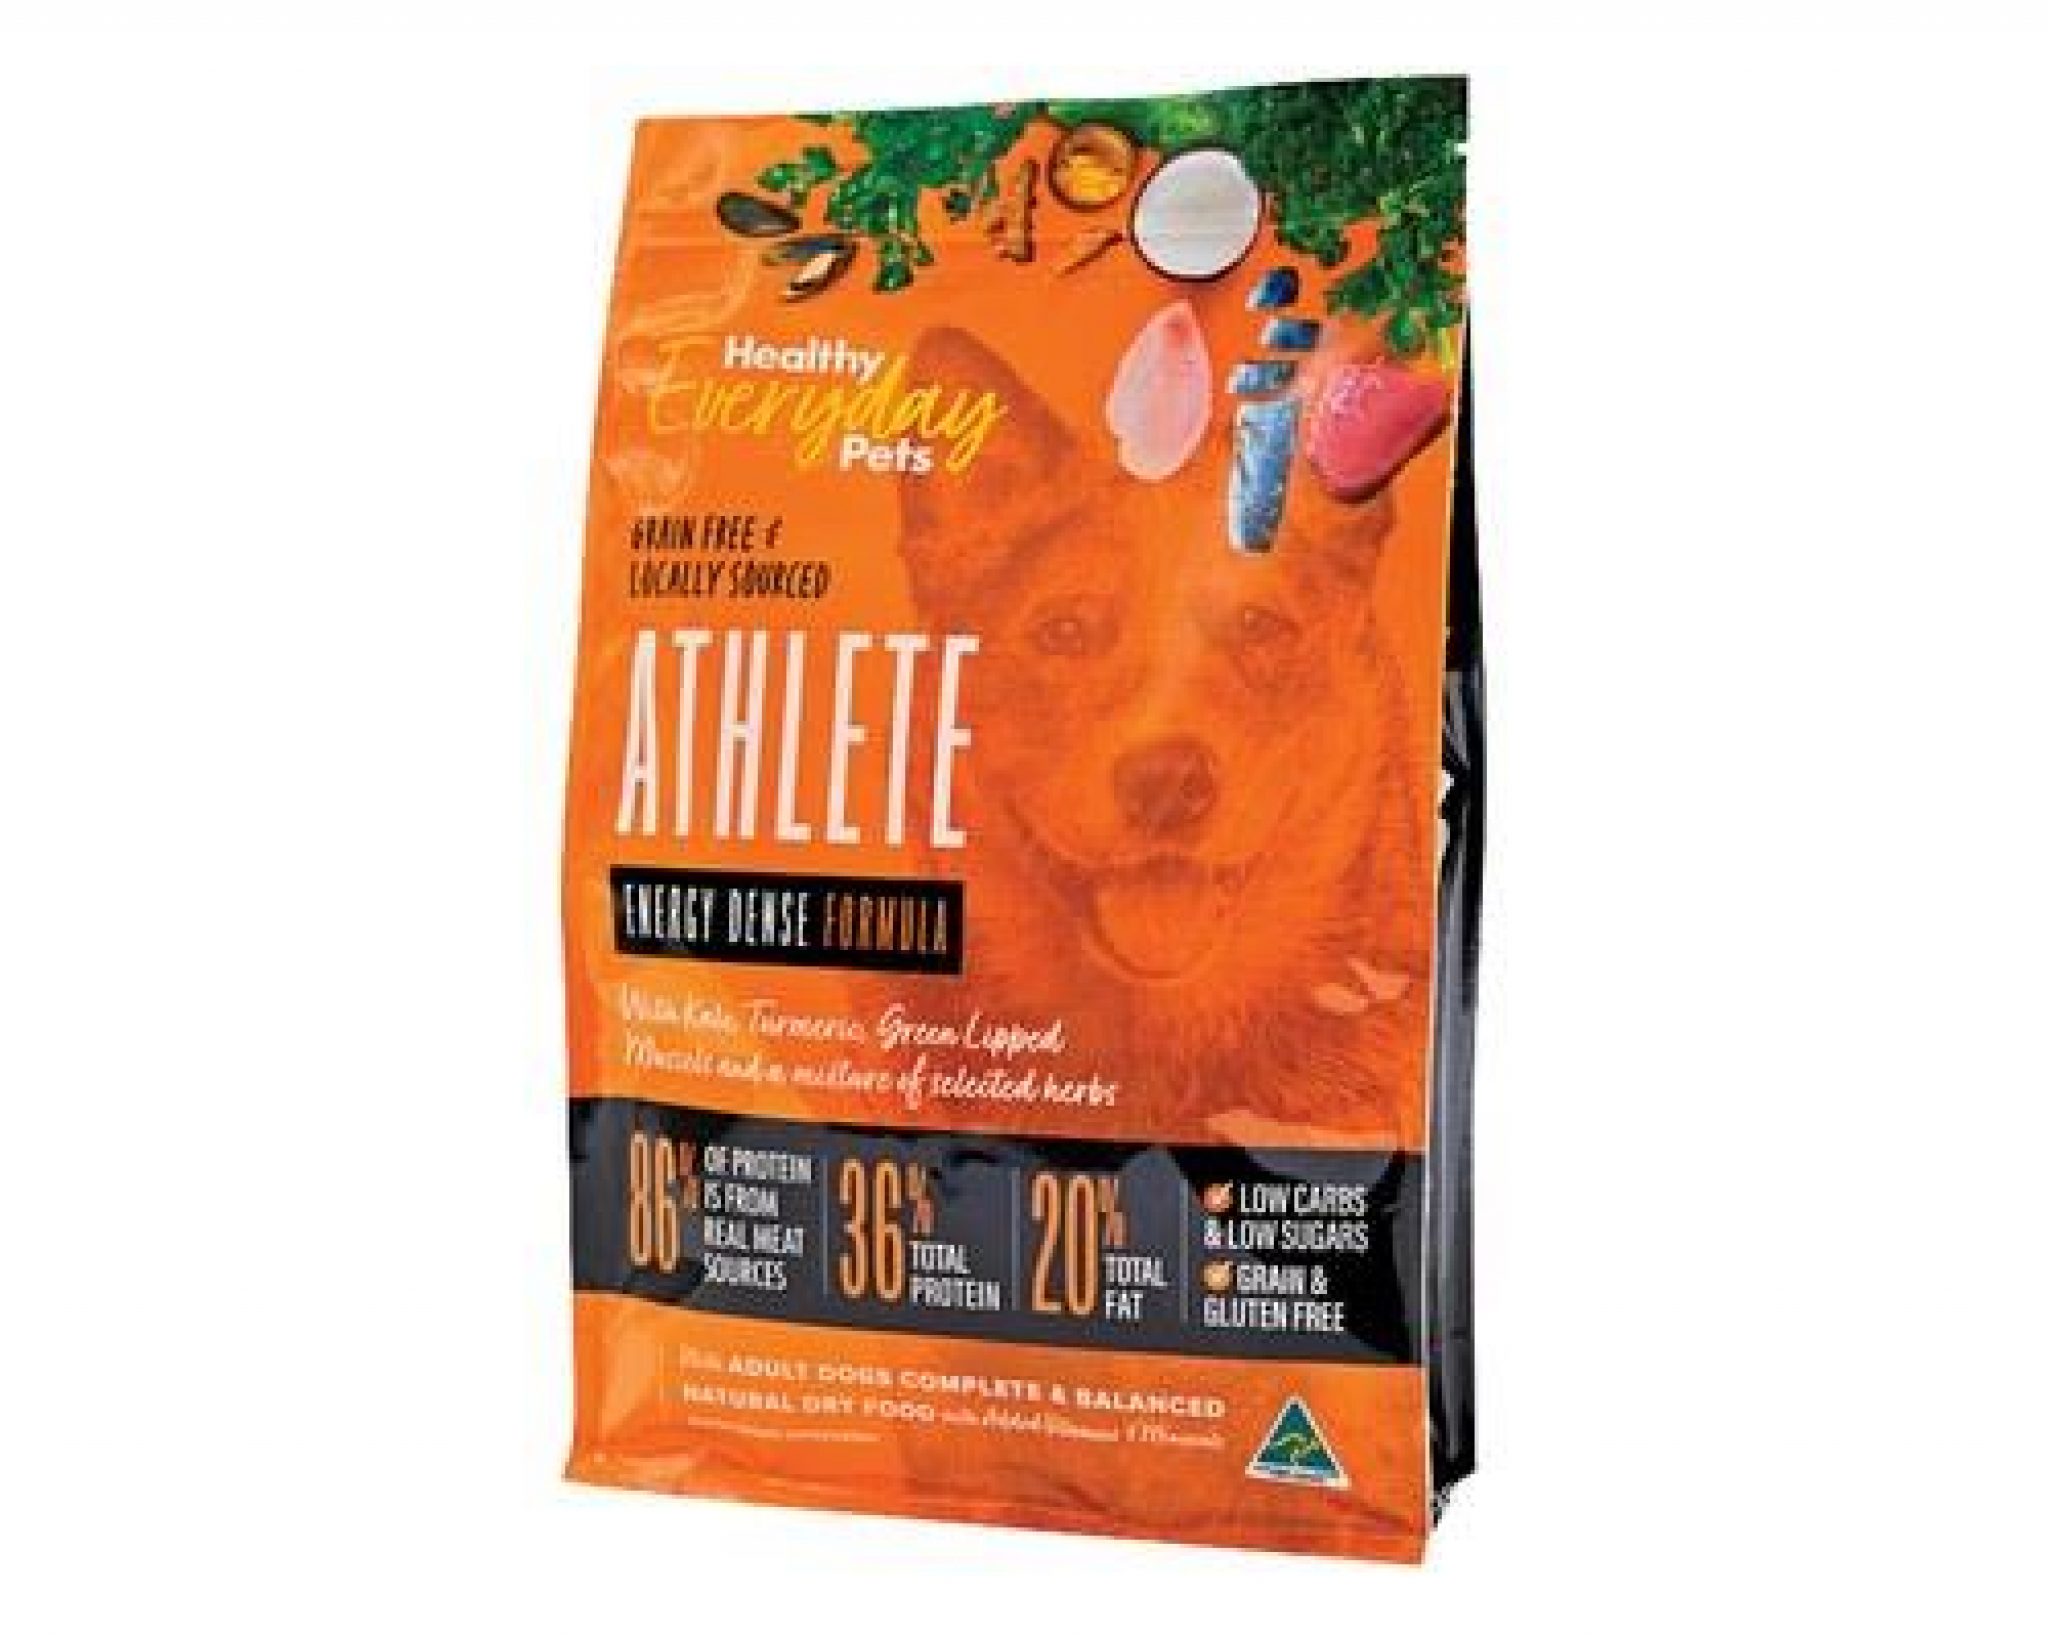 Healthy Everyday Pets Dog Athlete 12kg | Pet Food Reviews ...